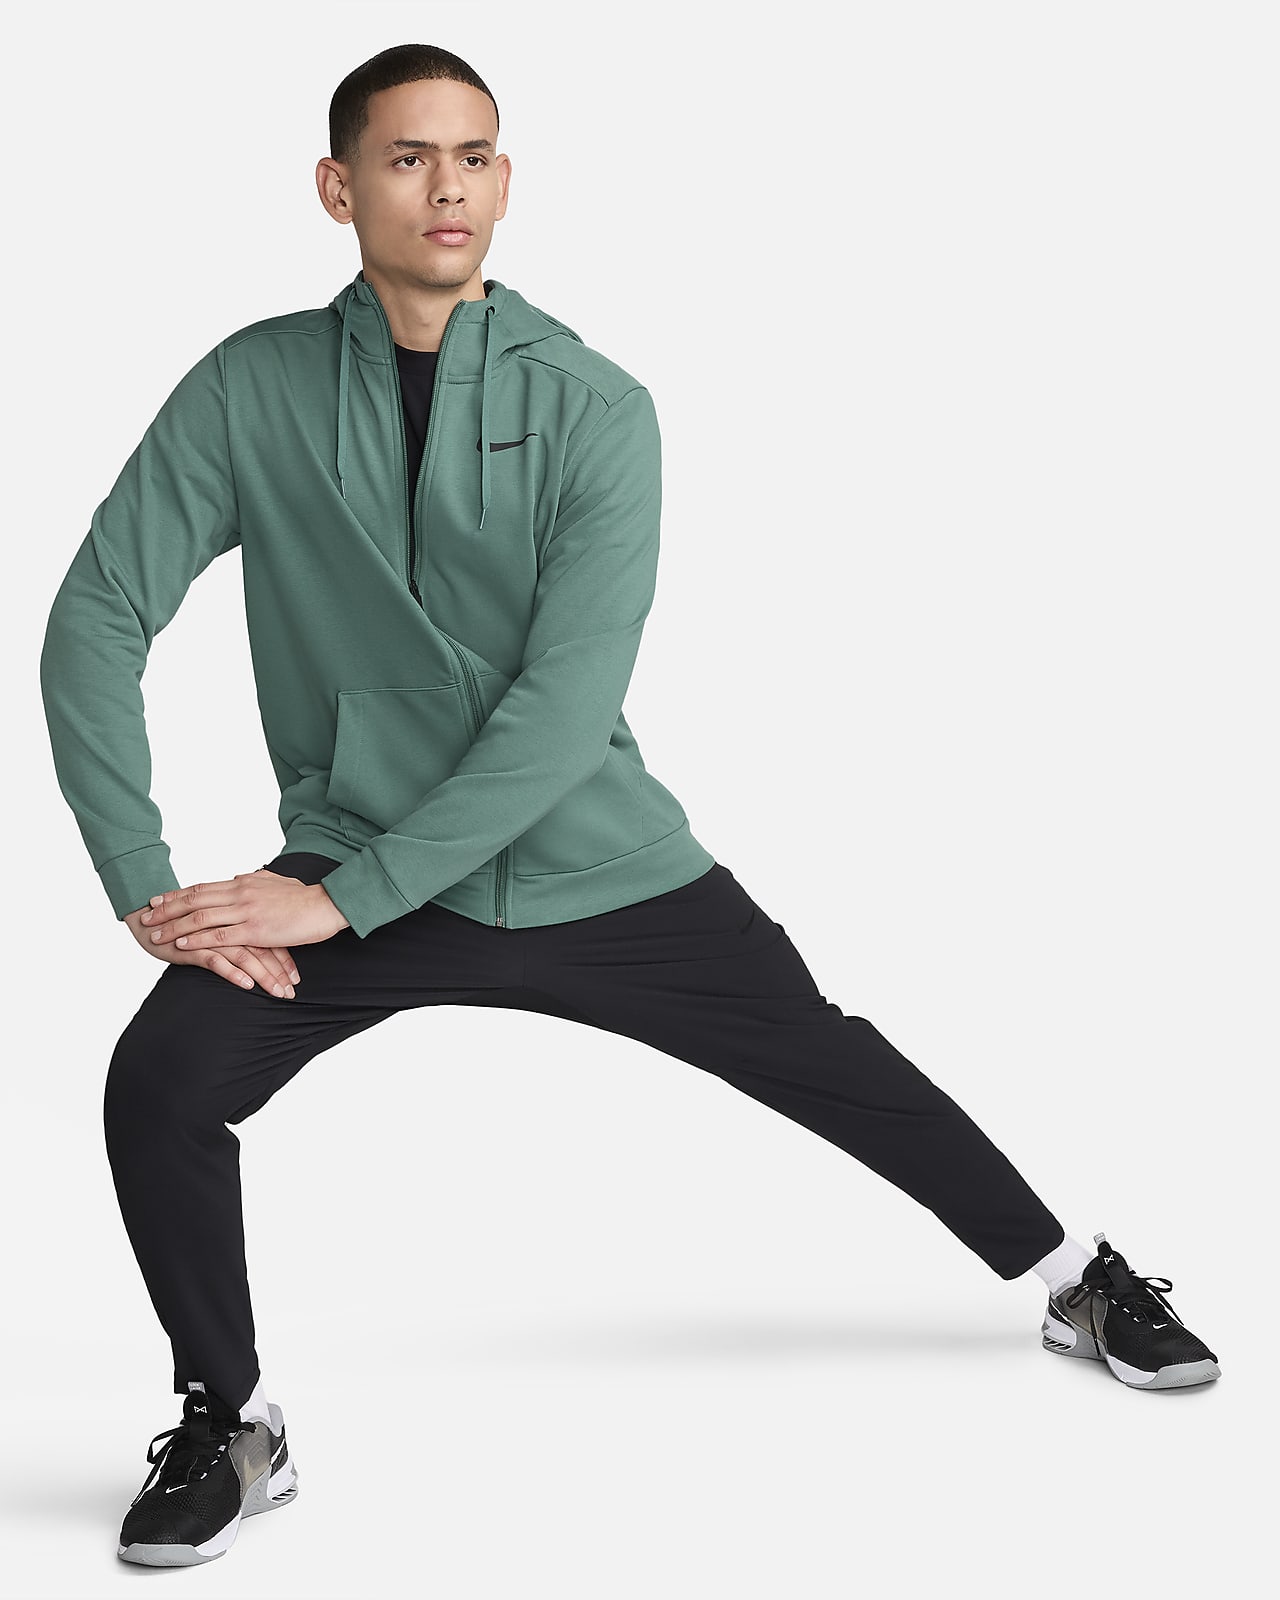 Nike Dri-FIT Hoodie The Nike Dri-FIT Hoodie is made of soft French terry  fabric with sweat-wicking power to help keep you warm and dry when you're  warming up, cooling down or catching